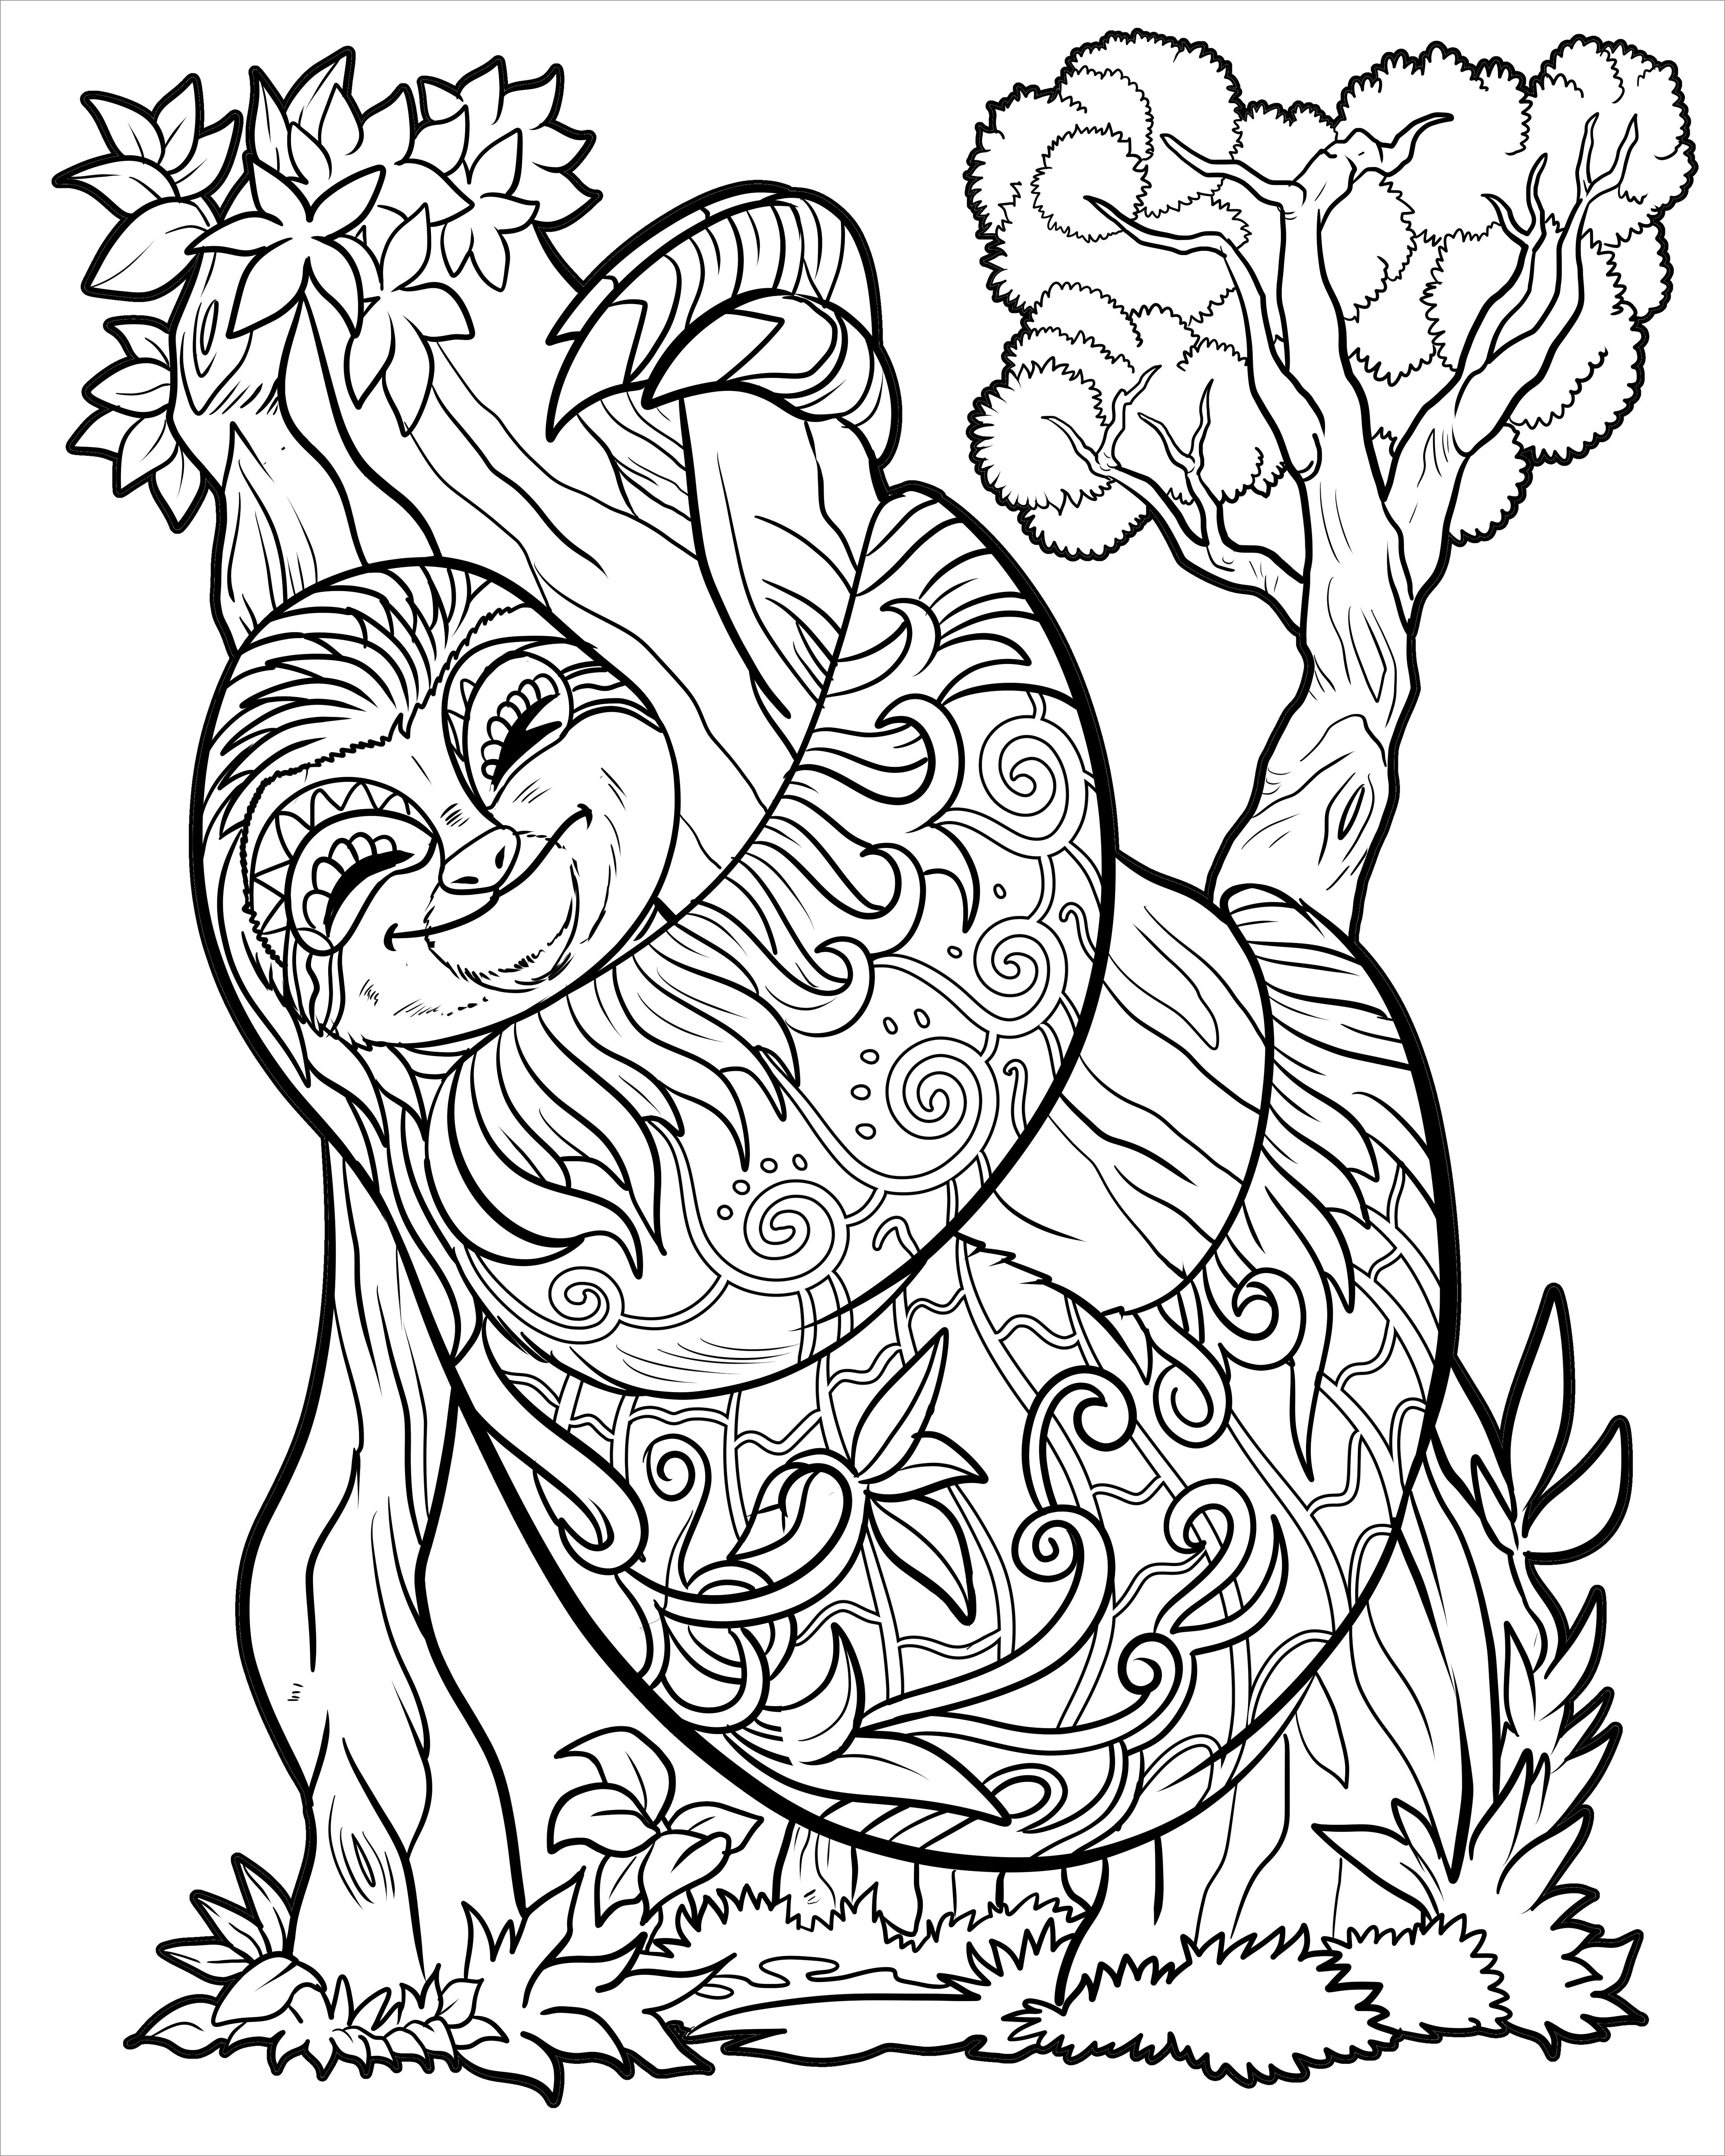 Zentangle Sloths Coloring Page for Adult   ColoringBay